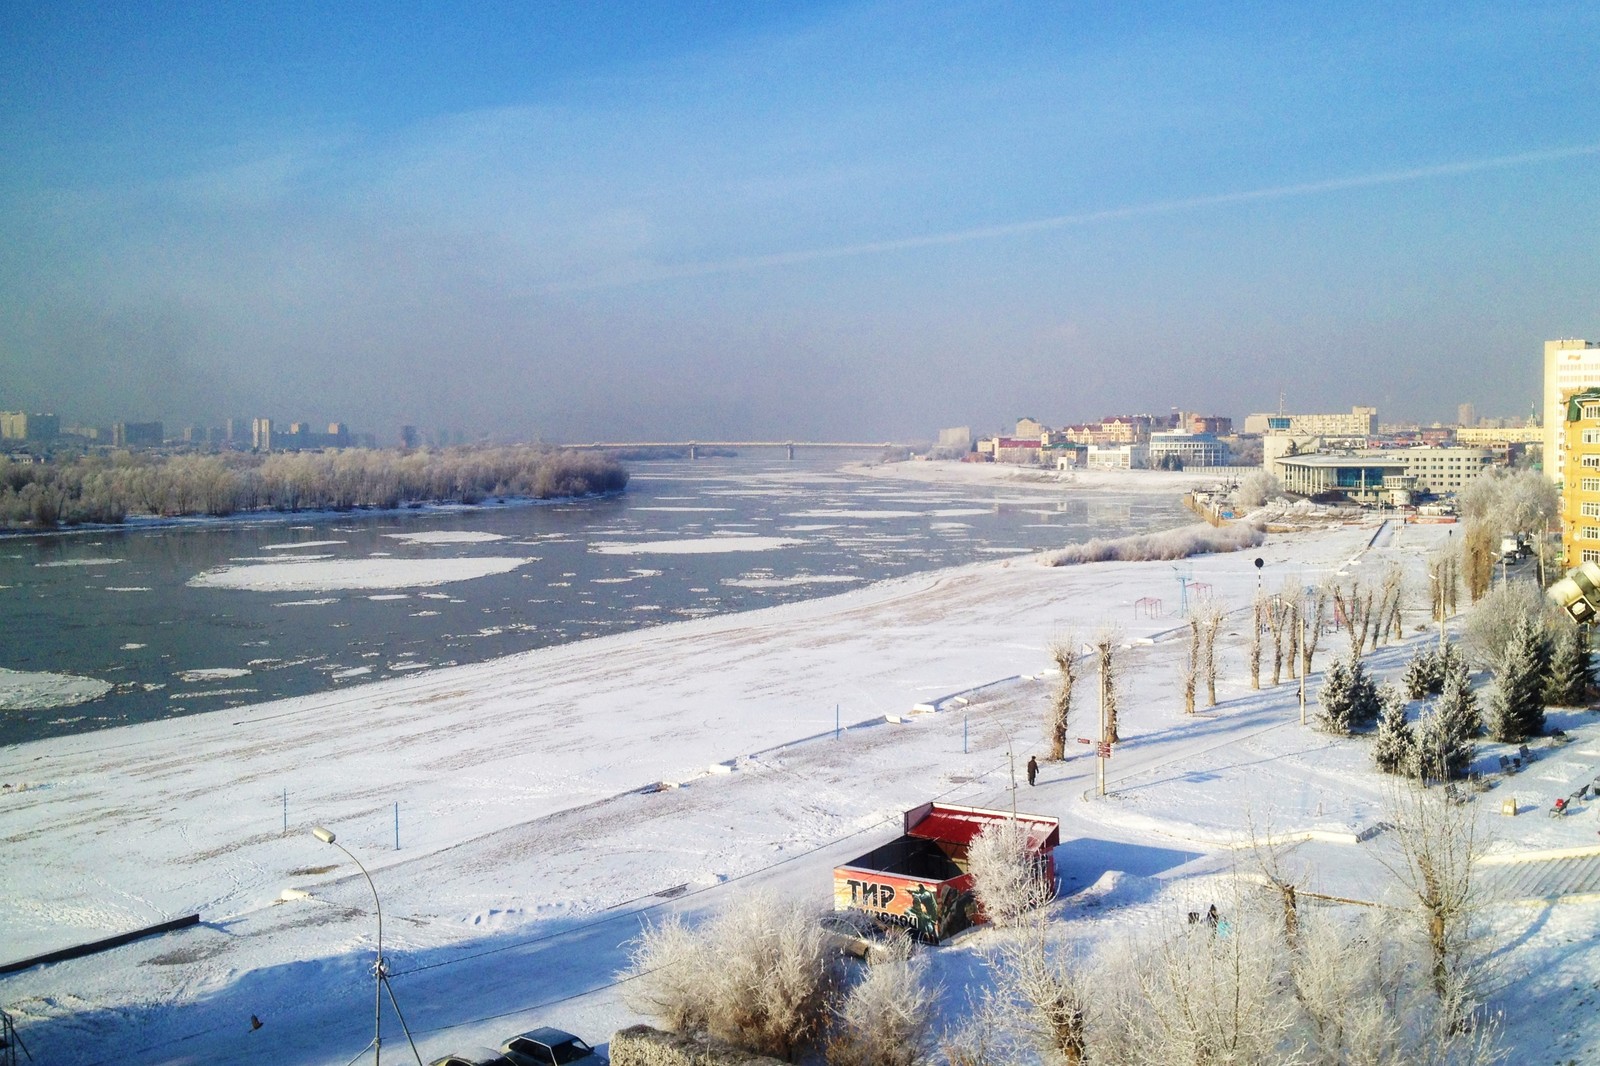 I've been living with this view for 15 years, and I still can't stop looking at it. - My, Omsk, Irtysh, Embankment, View from the balcony, Seasons, Russia, Beach, Snow, Longpost